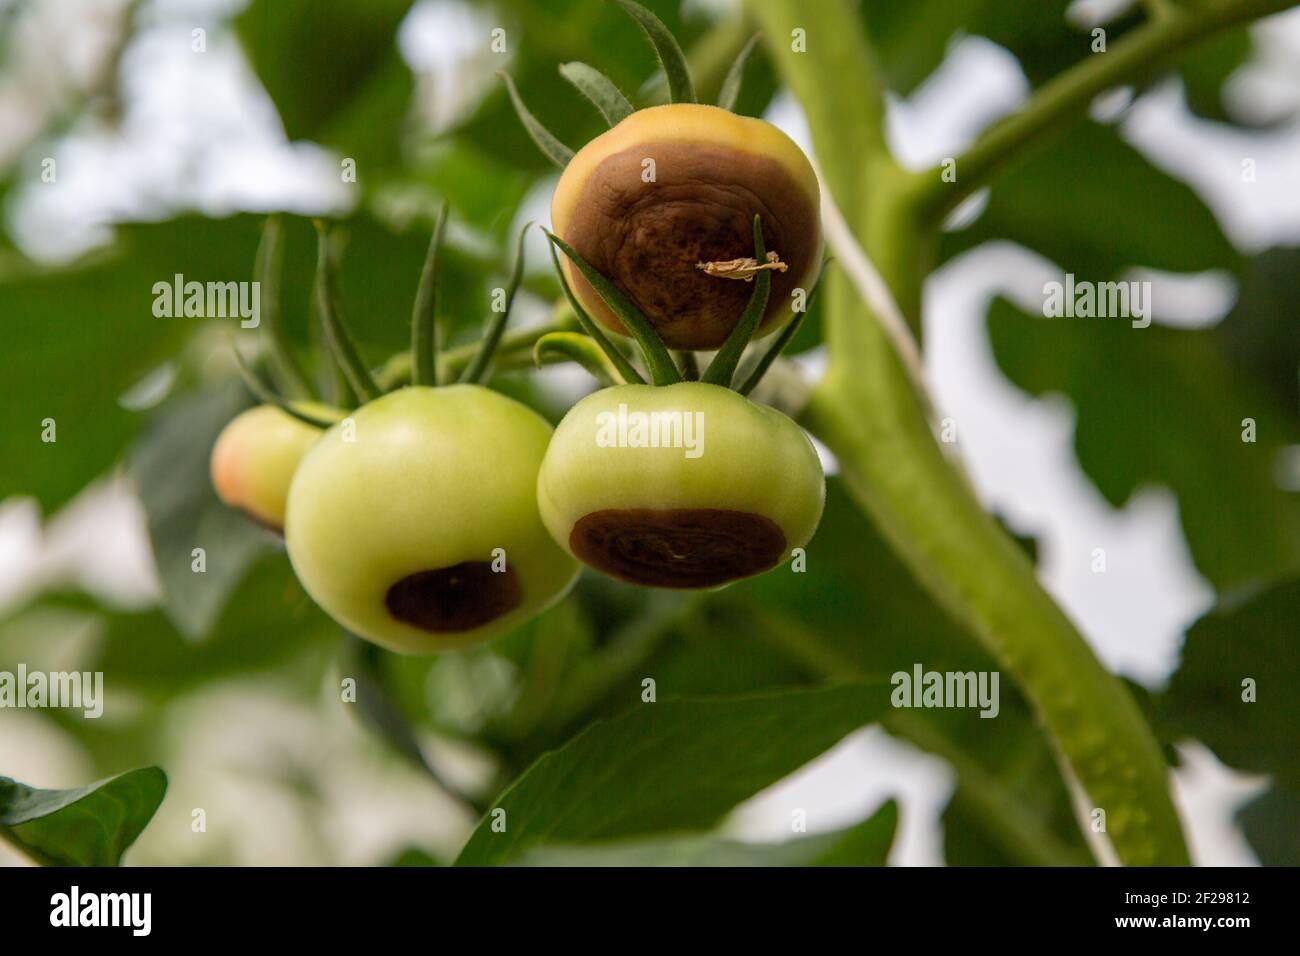 Still green, unripe, young tomato fruits affected by blossom end rot. This physiological disorder in tomato, caused by calcium deficiency. Stock Photo